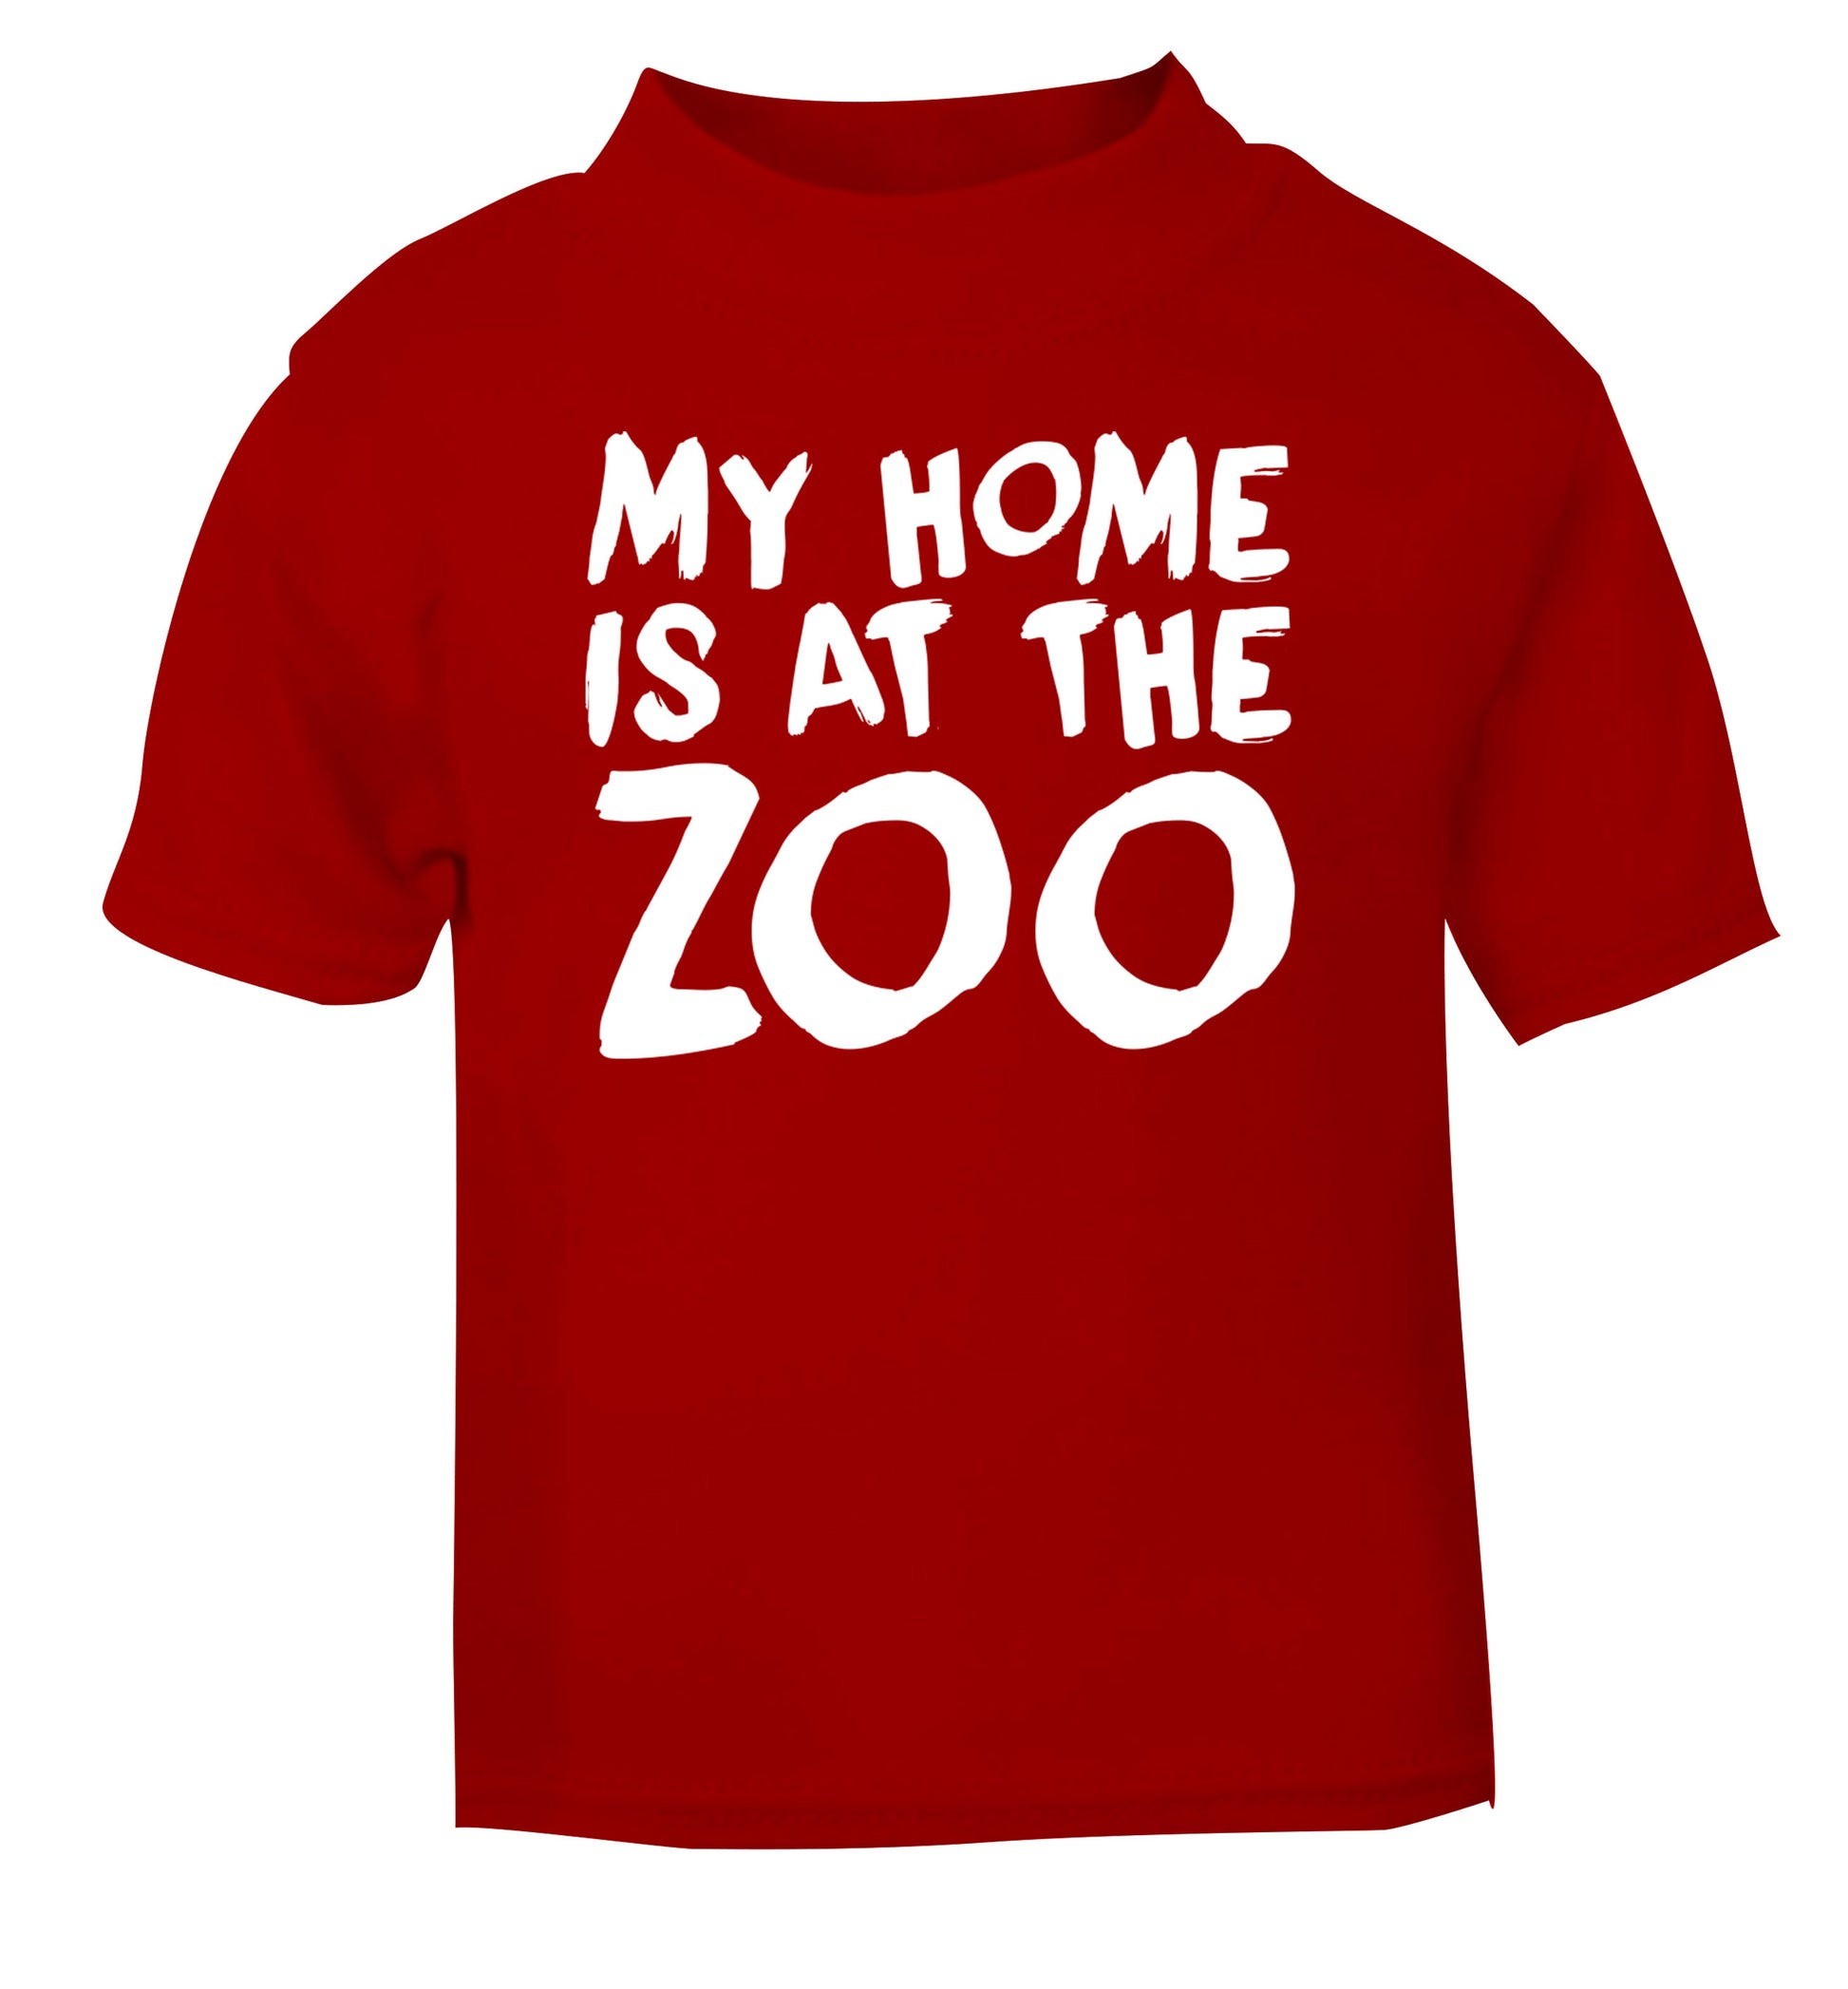 My home is at the zoo red Baby Toddler Tshirt 2 Years